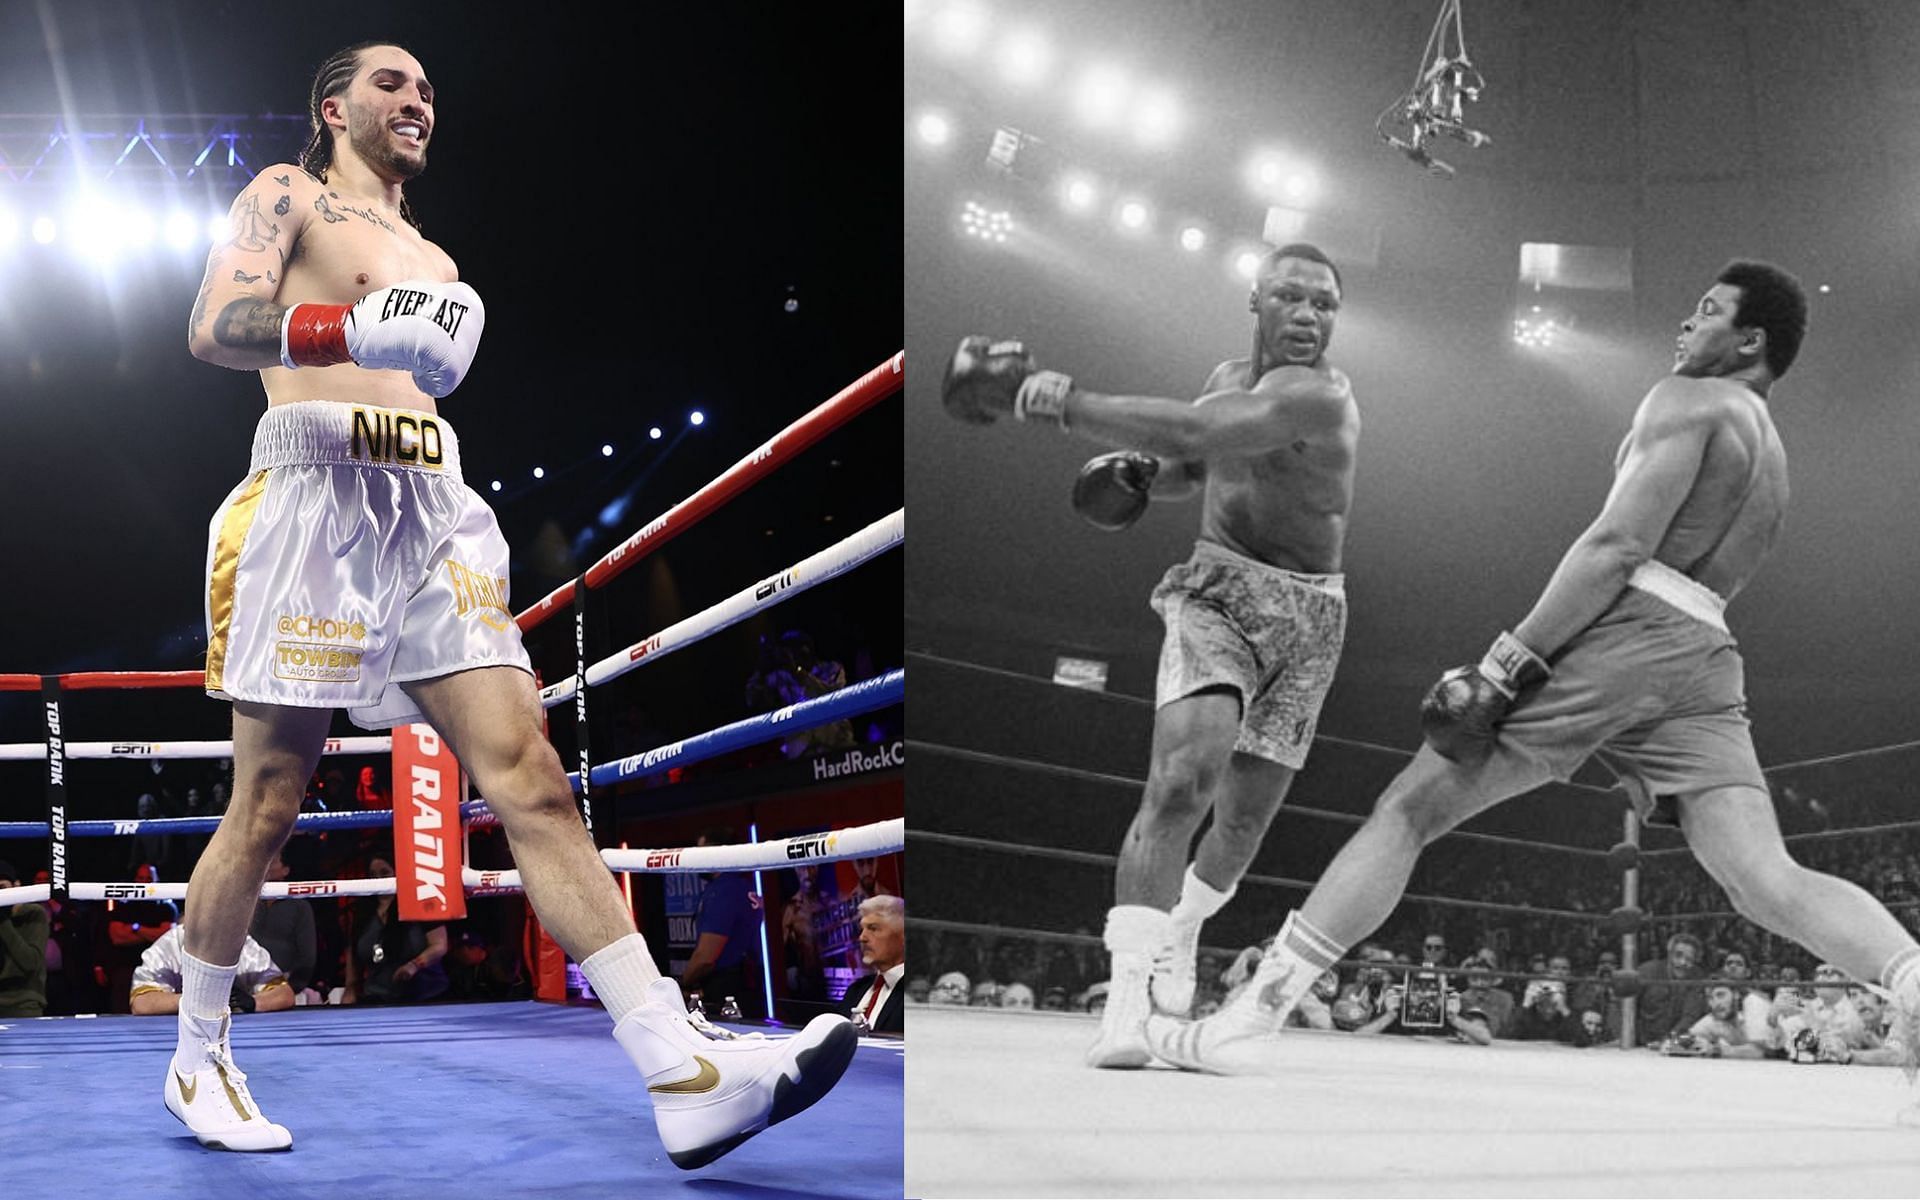 Nico Ali Walsh pulled off his grandfather Muhammad Ali&#039;s signature shuffle before knocking his opponent out. [Credits: @forbes, @NicoAliX74 via Twitter]